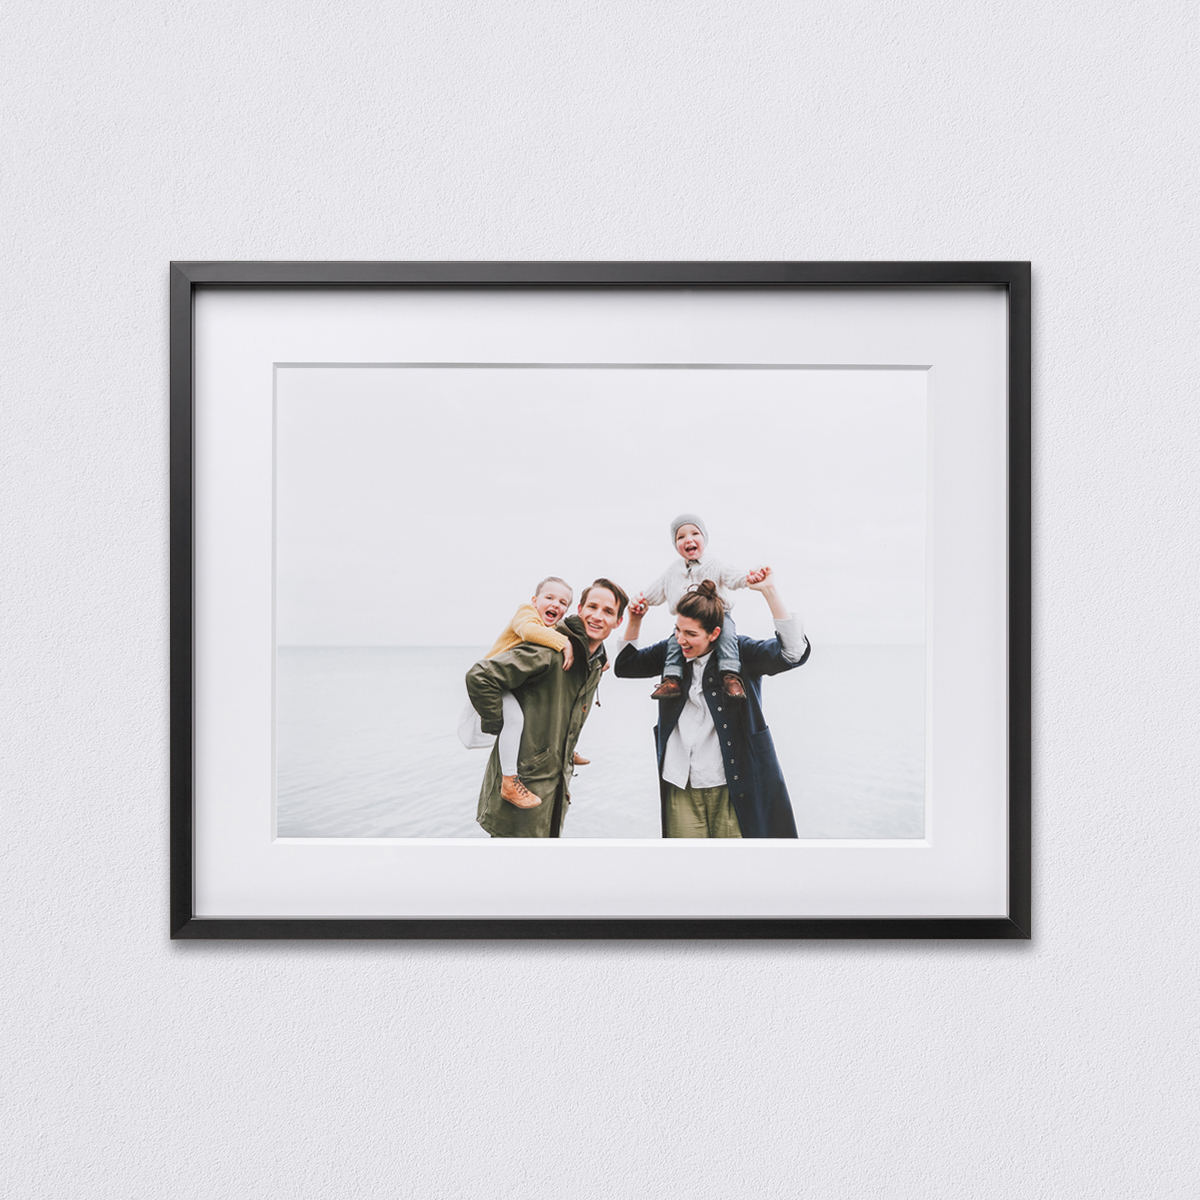 20 x 16 inch Black Modern Metal Frame featuring photo of parents giving two small children piggy back rides on the beach matted to 17 x 13 inch